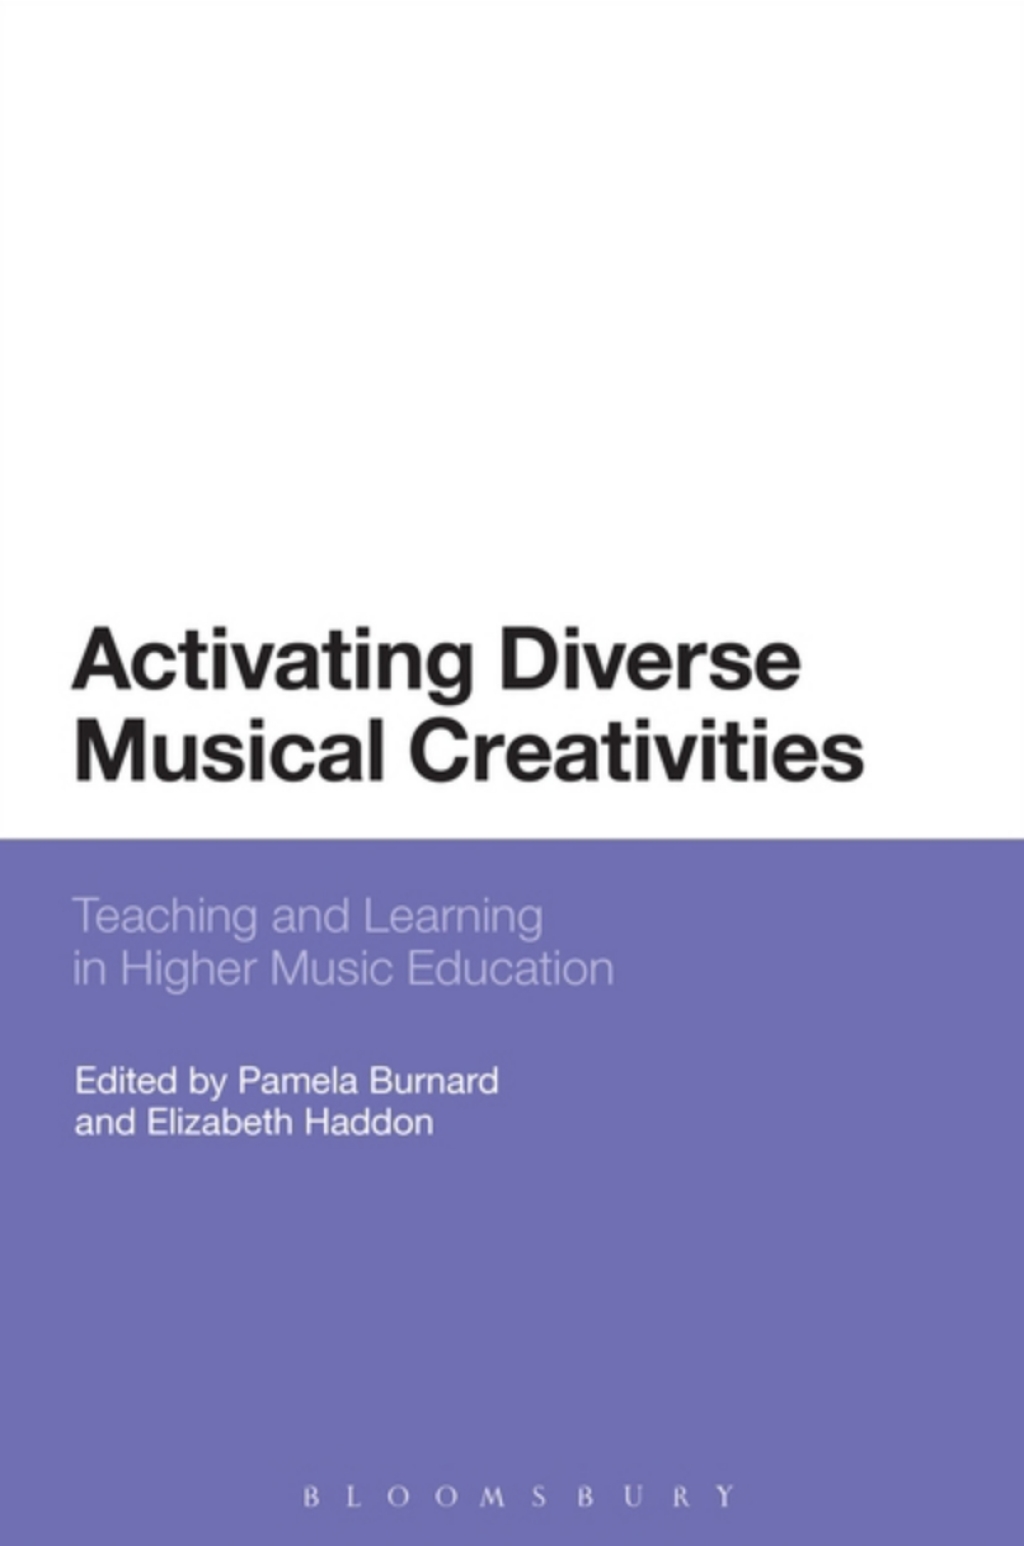 ISBN 9781350000001 product image for Activating Diverse Musical Creativities - 1st Edition (eBook Rental) | upcitemdb.com